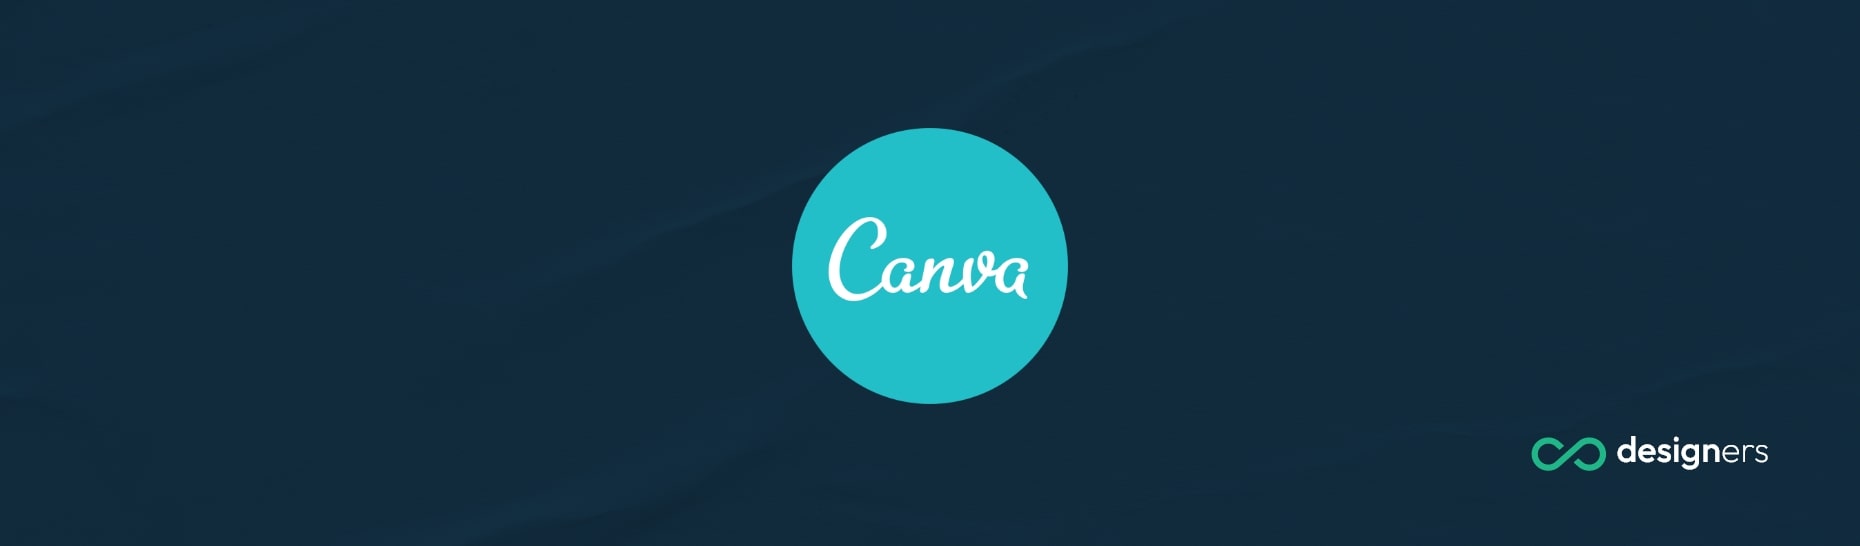 Can I print a banner from Canva?